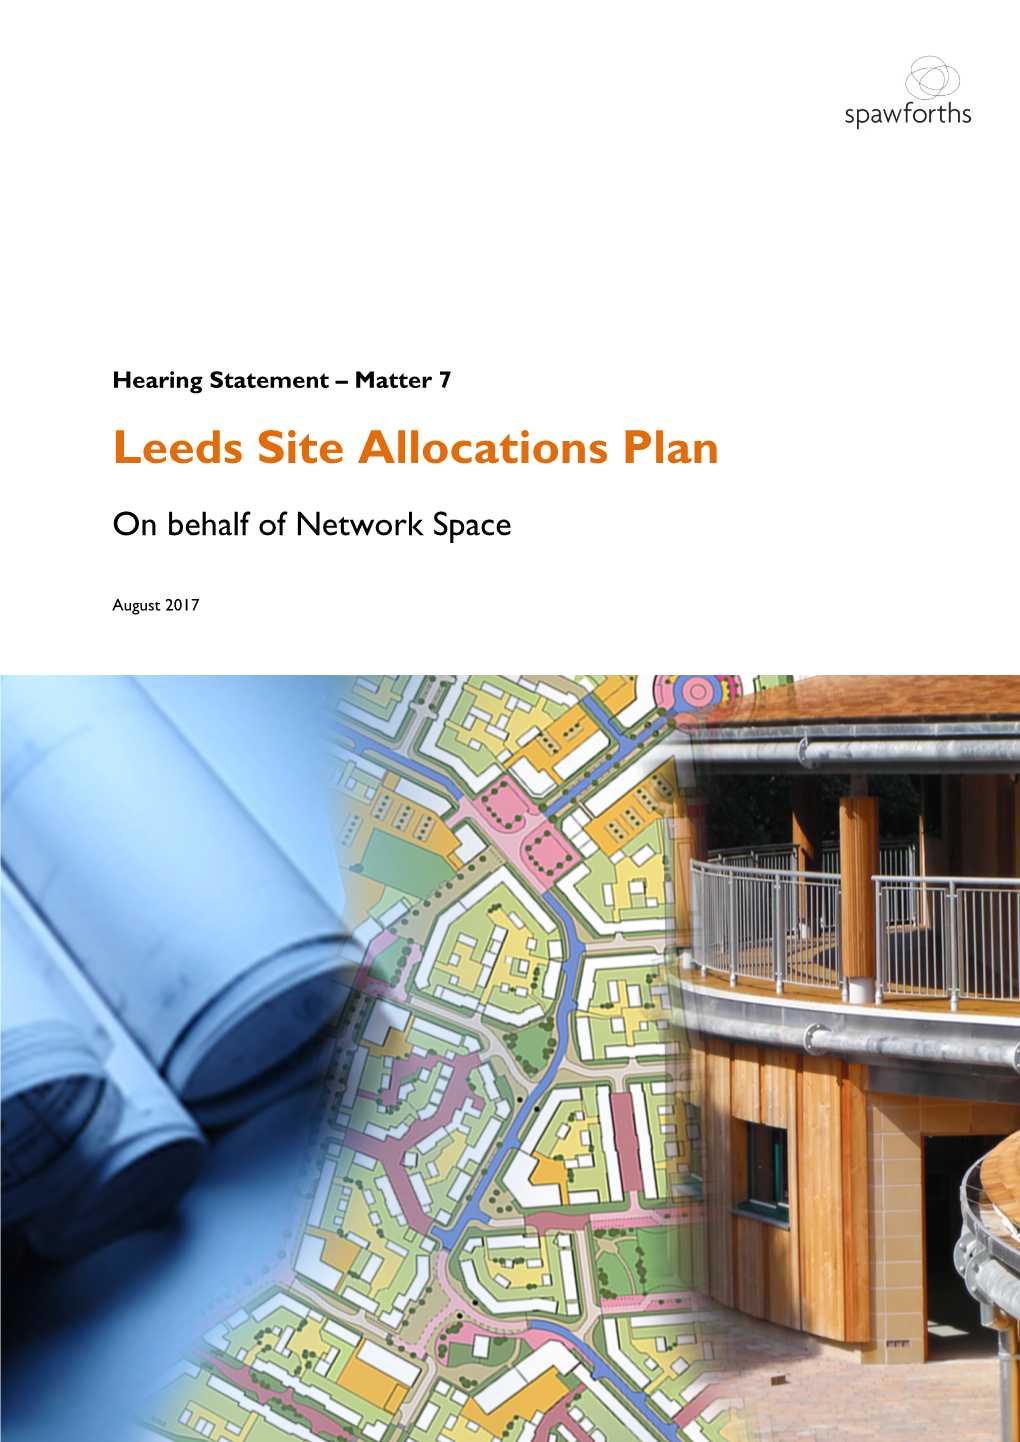 Leeds Site Allocations Plan on Behalf of Network Space